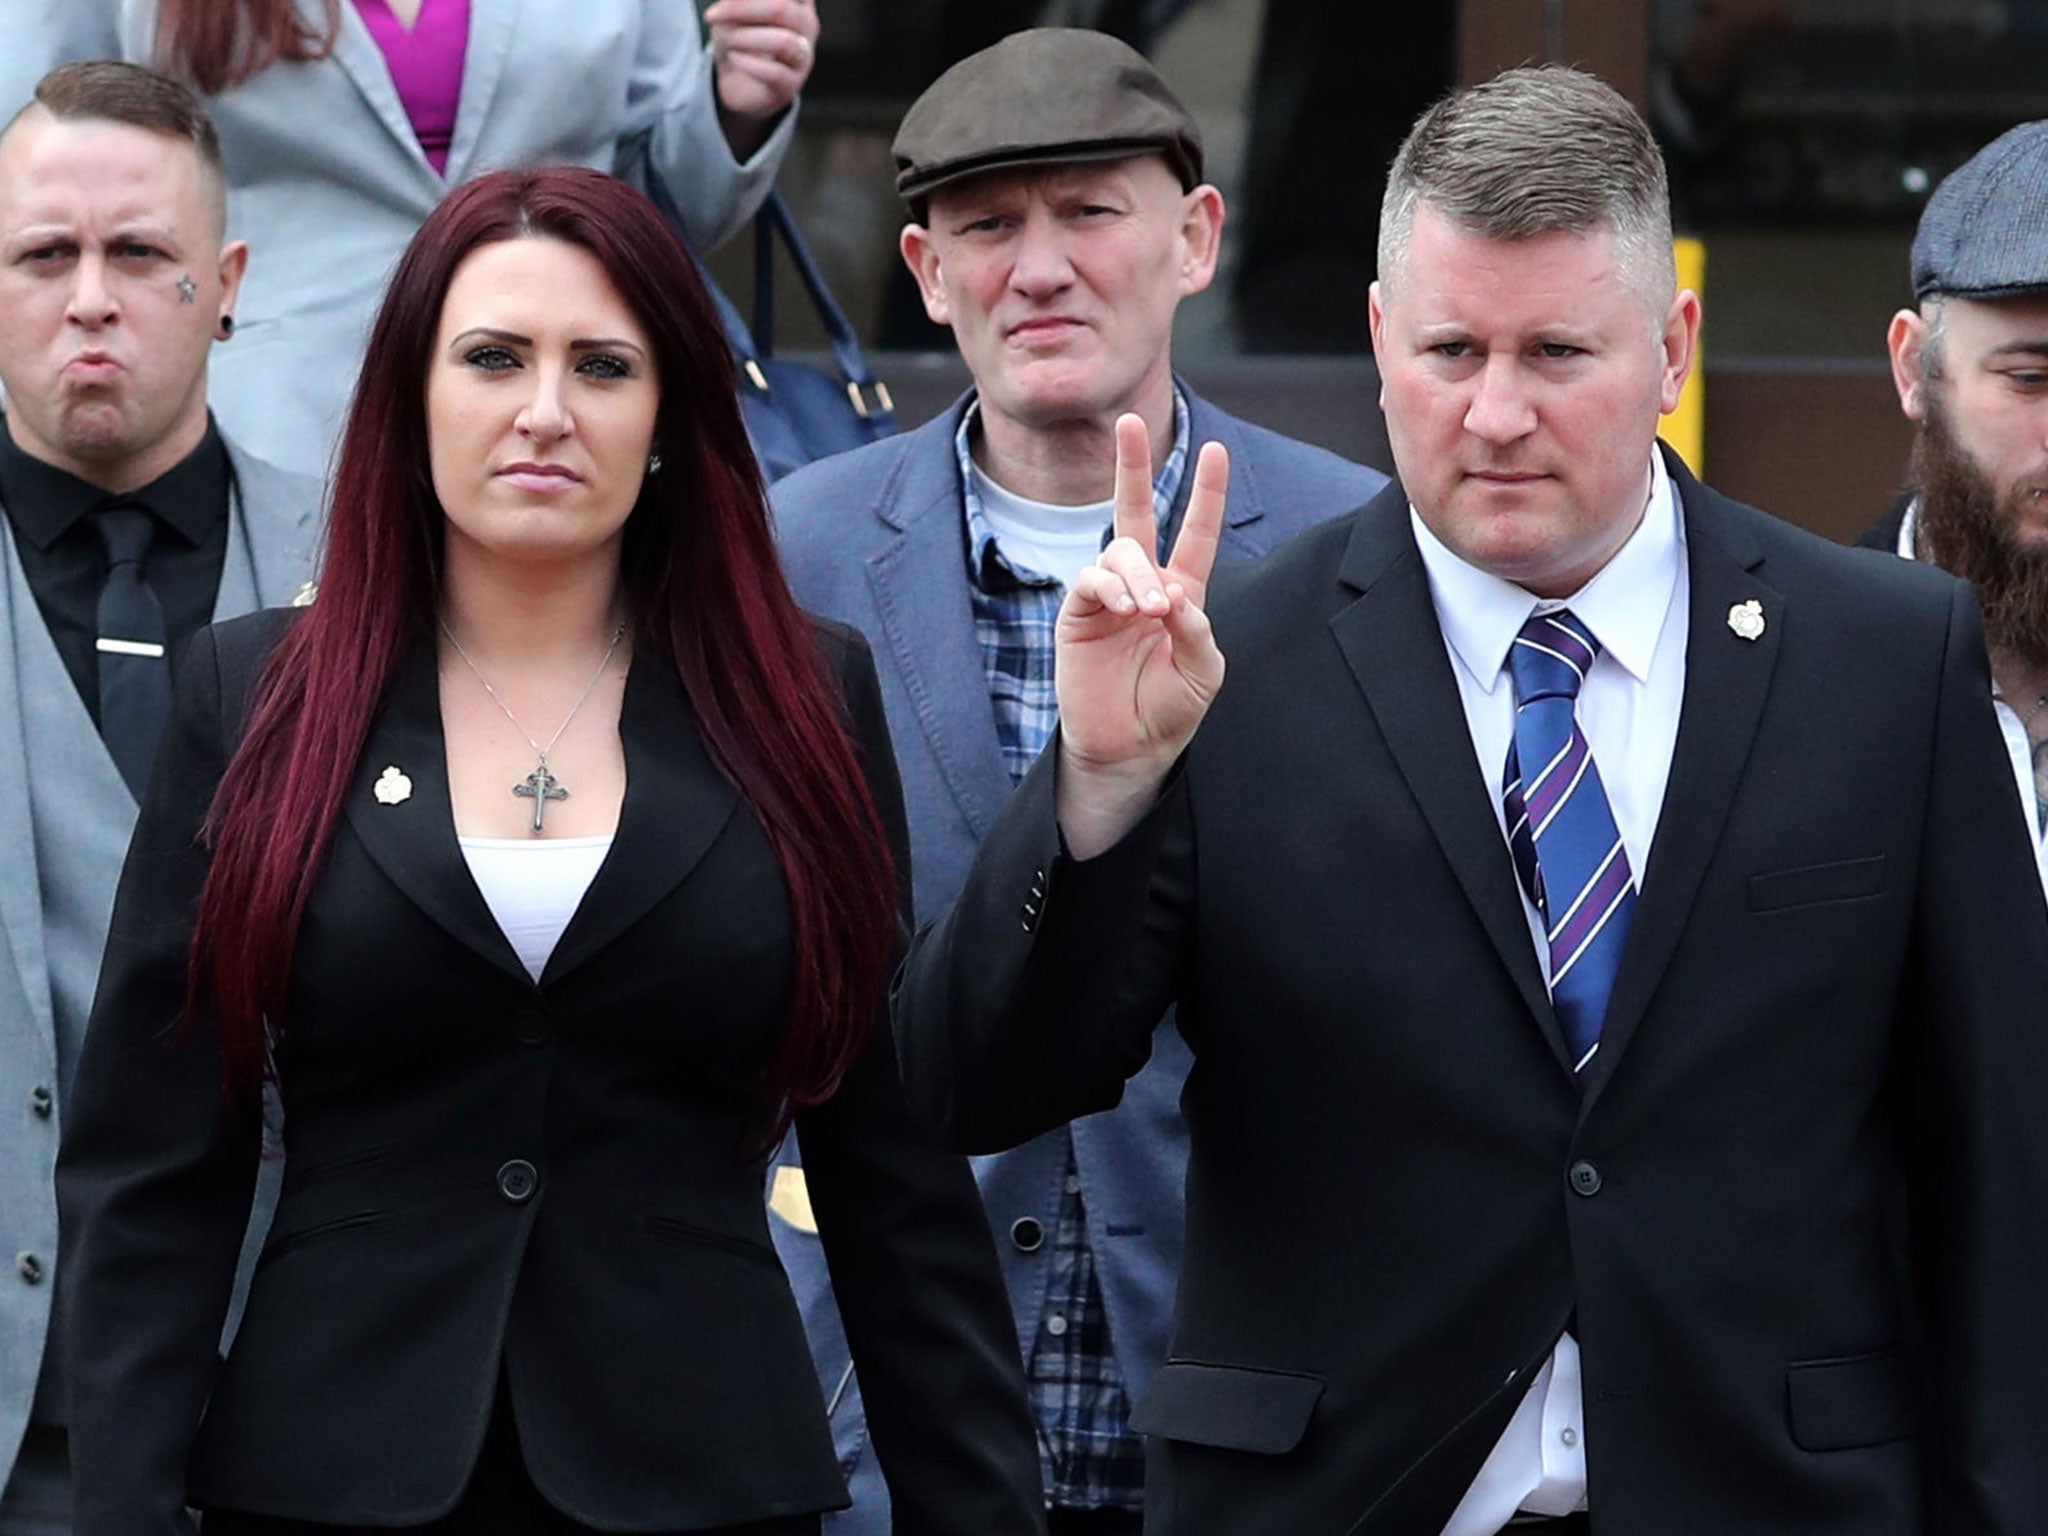 Britain First leaders jailed for anti-Muslim hate crime